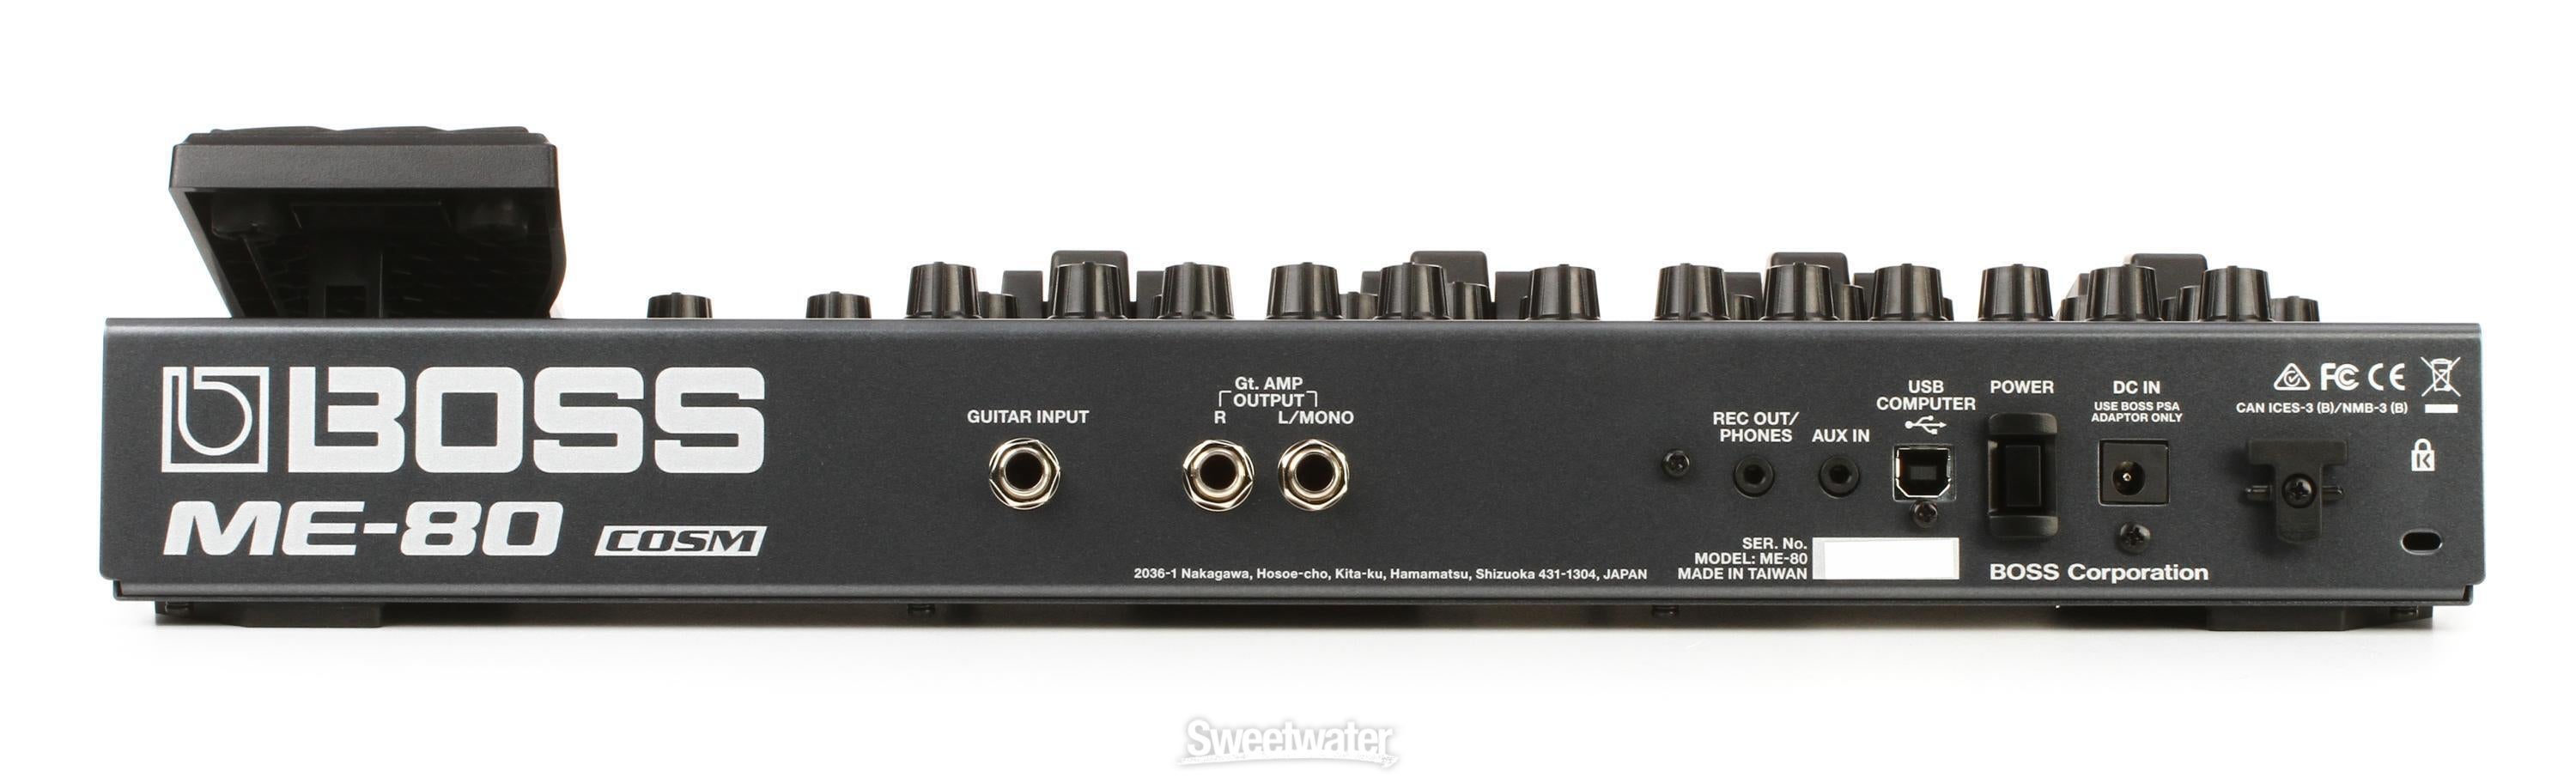 Boss ME-80 Guitar Multi-effects Pedal Reviews | Sweetwater